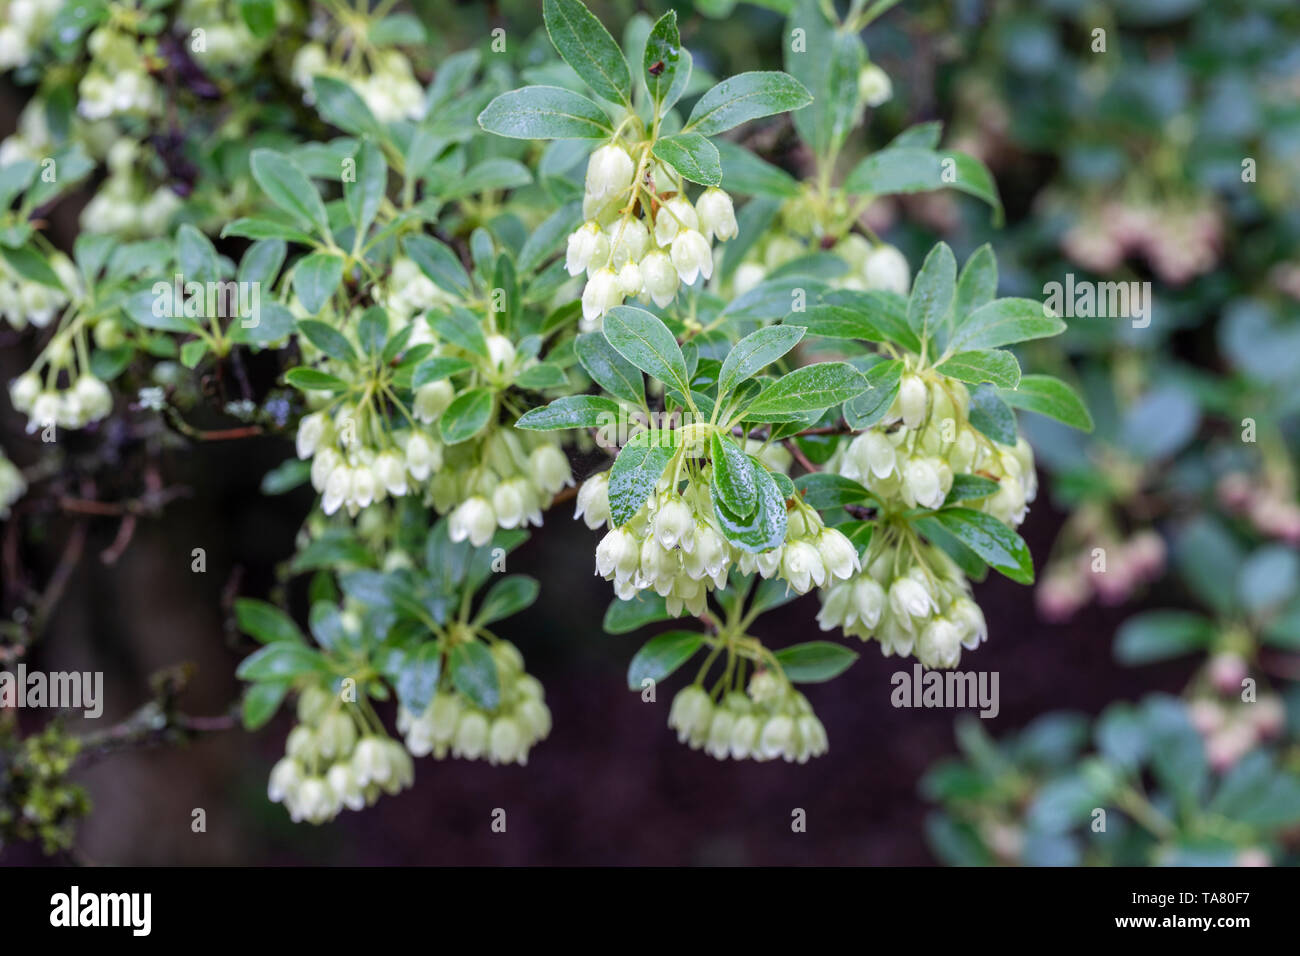 Close up of the white bell shaped flowers from Enkianthus campanulatus albiflorus, England, UK Stock Photo